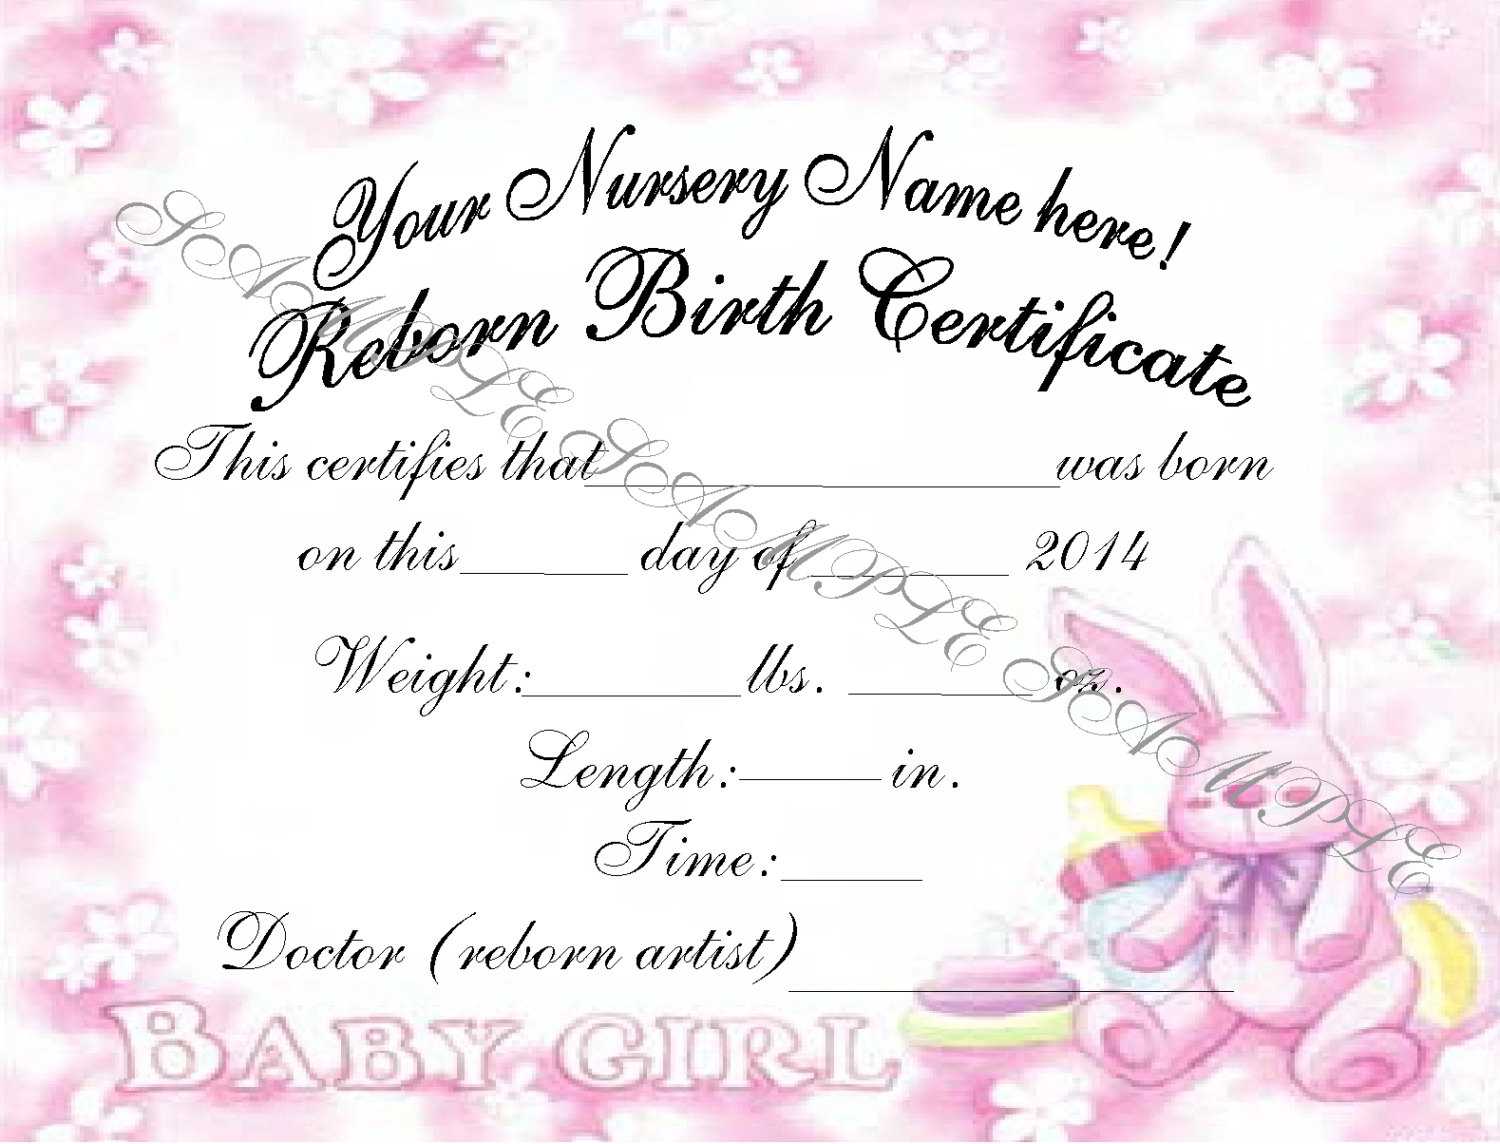 Baby Girl Birth Certificate Template Videotekaalex Tk Within Girl Birth Certificate Template